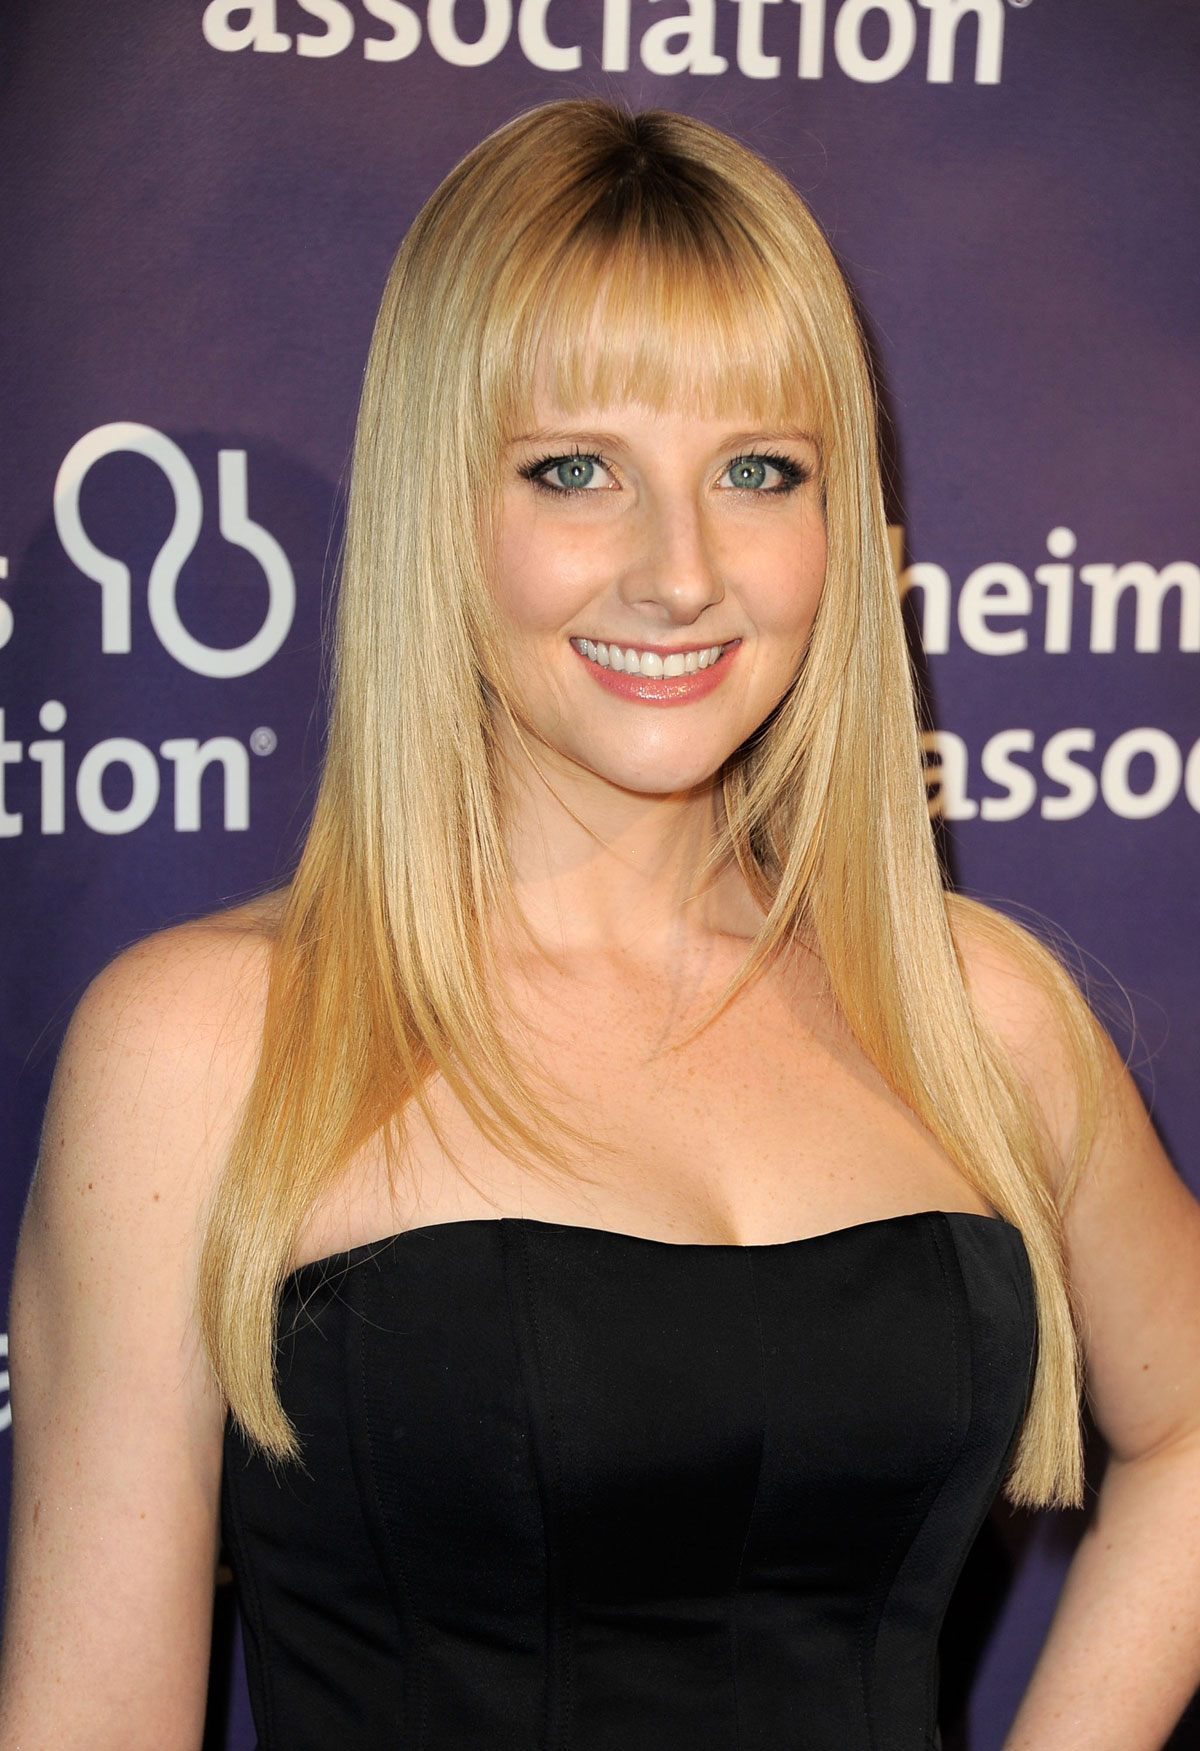 60 Hottest Melissa Rauch Bikini Pictures Expose Her Sexy Body.